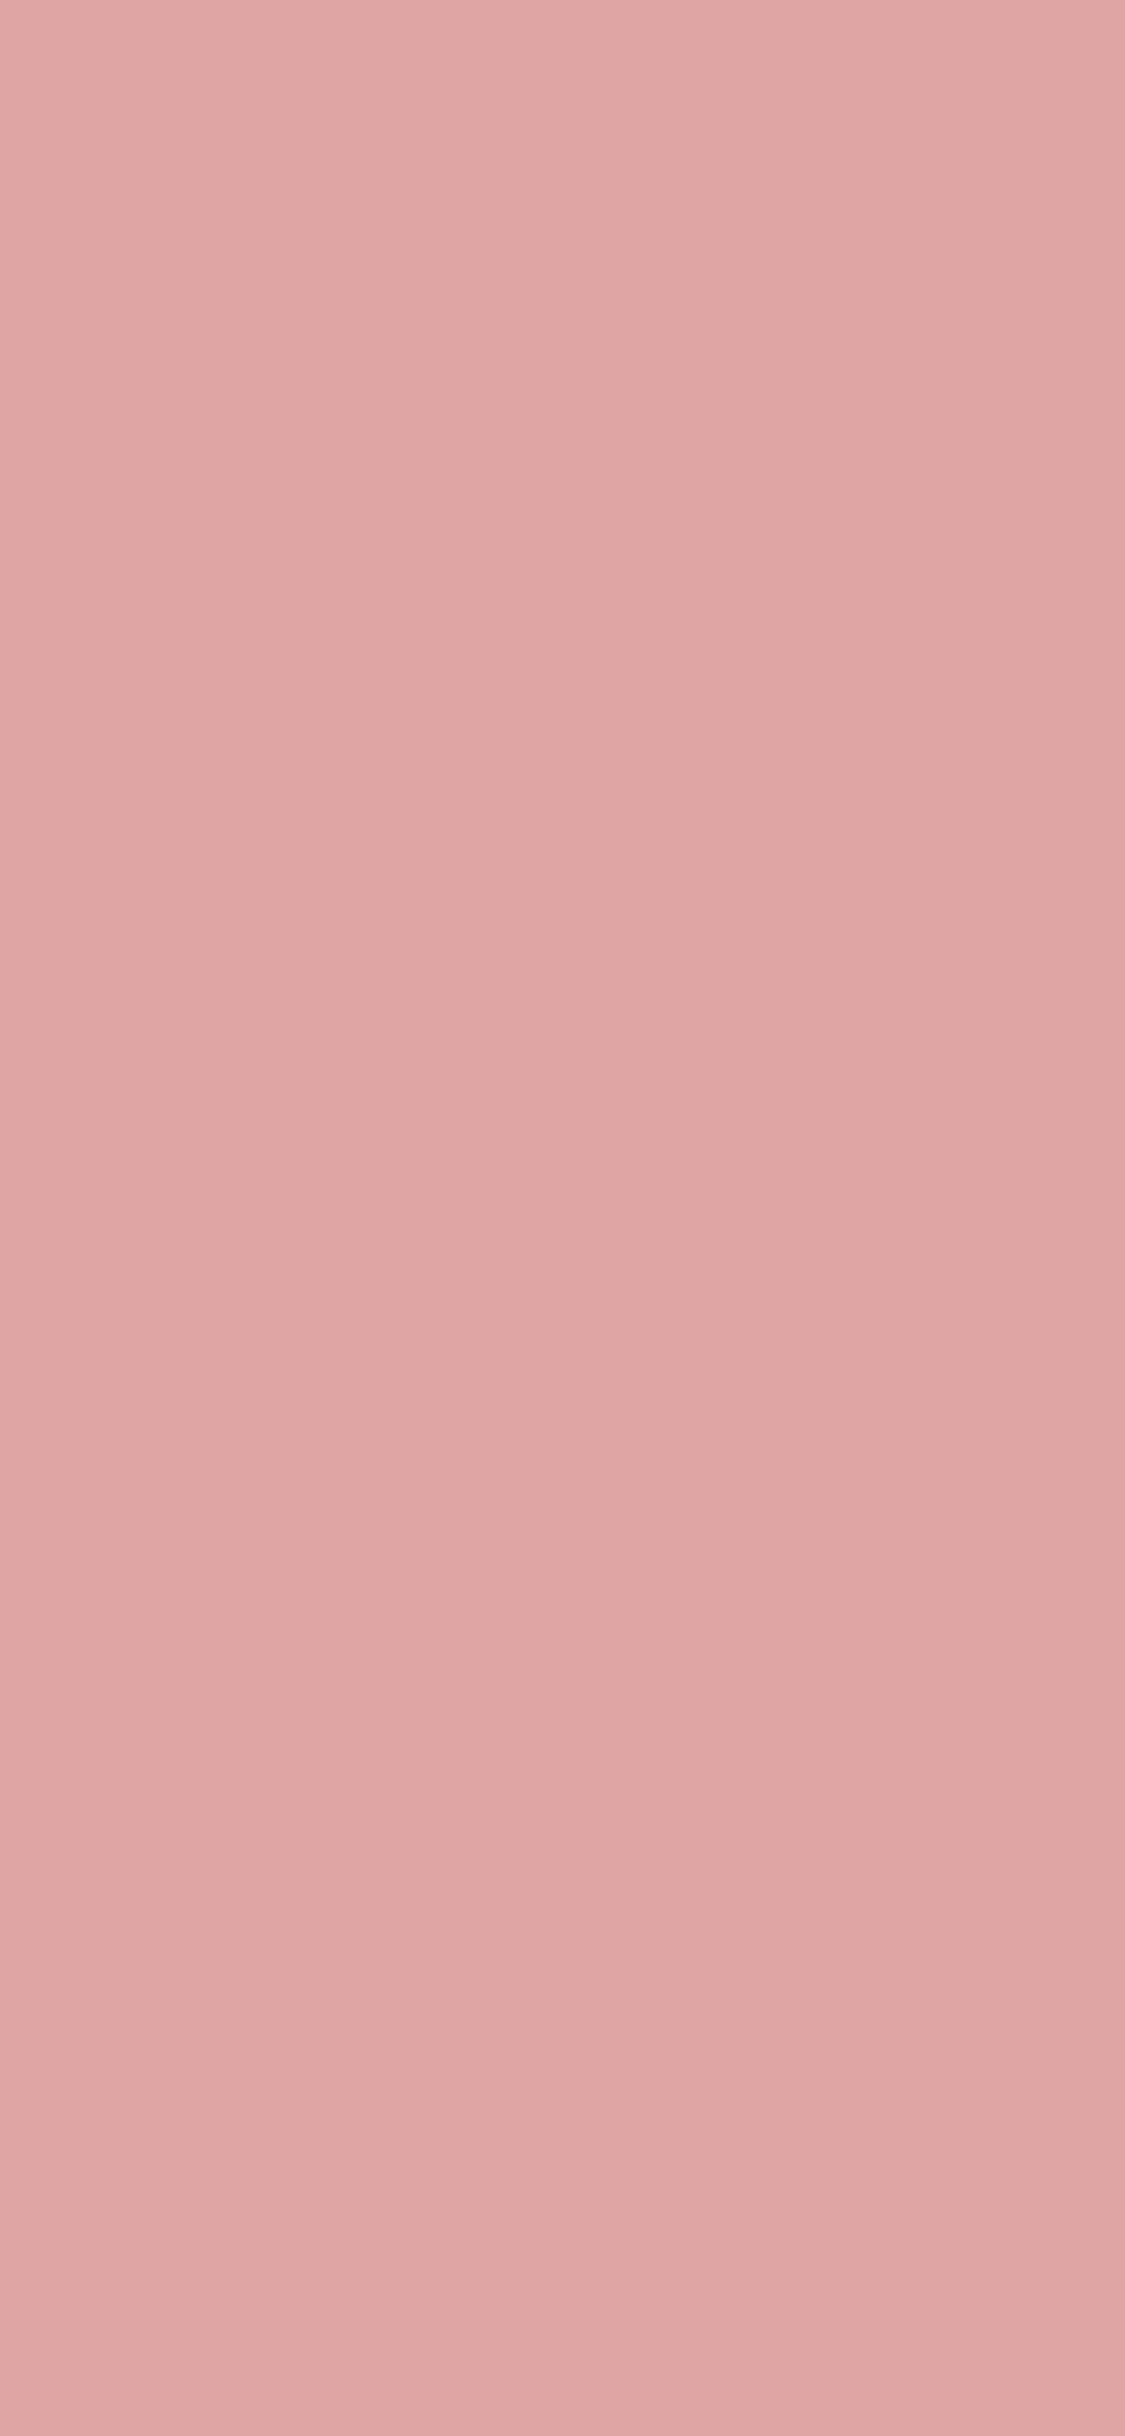 1125x2436 Pastel Pink Solid Color Background